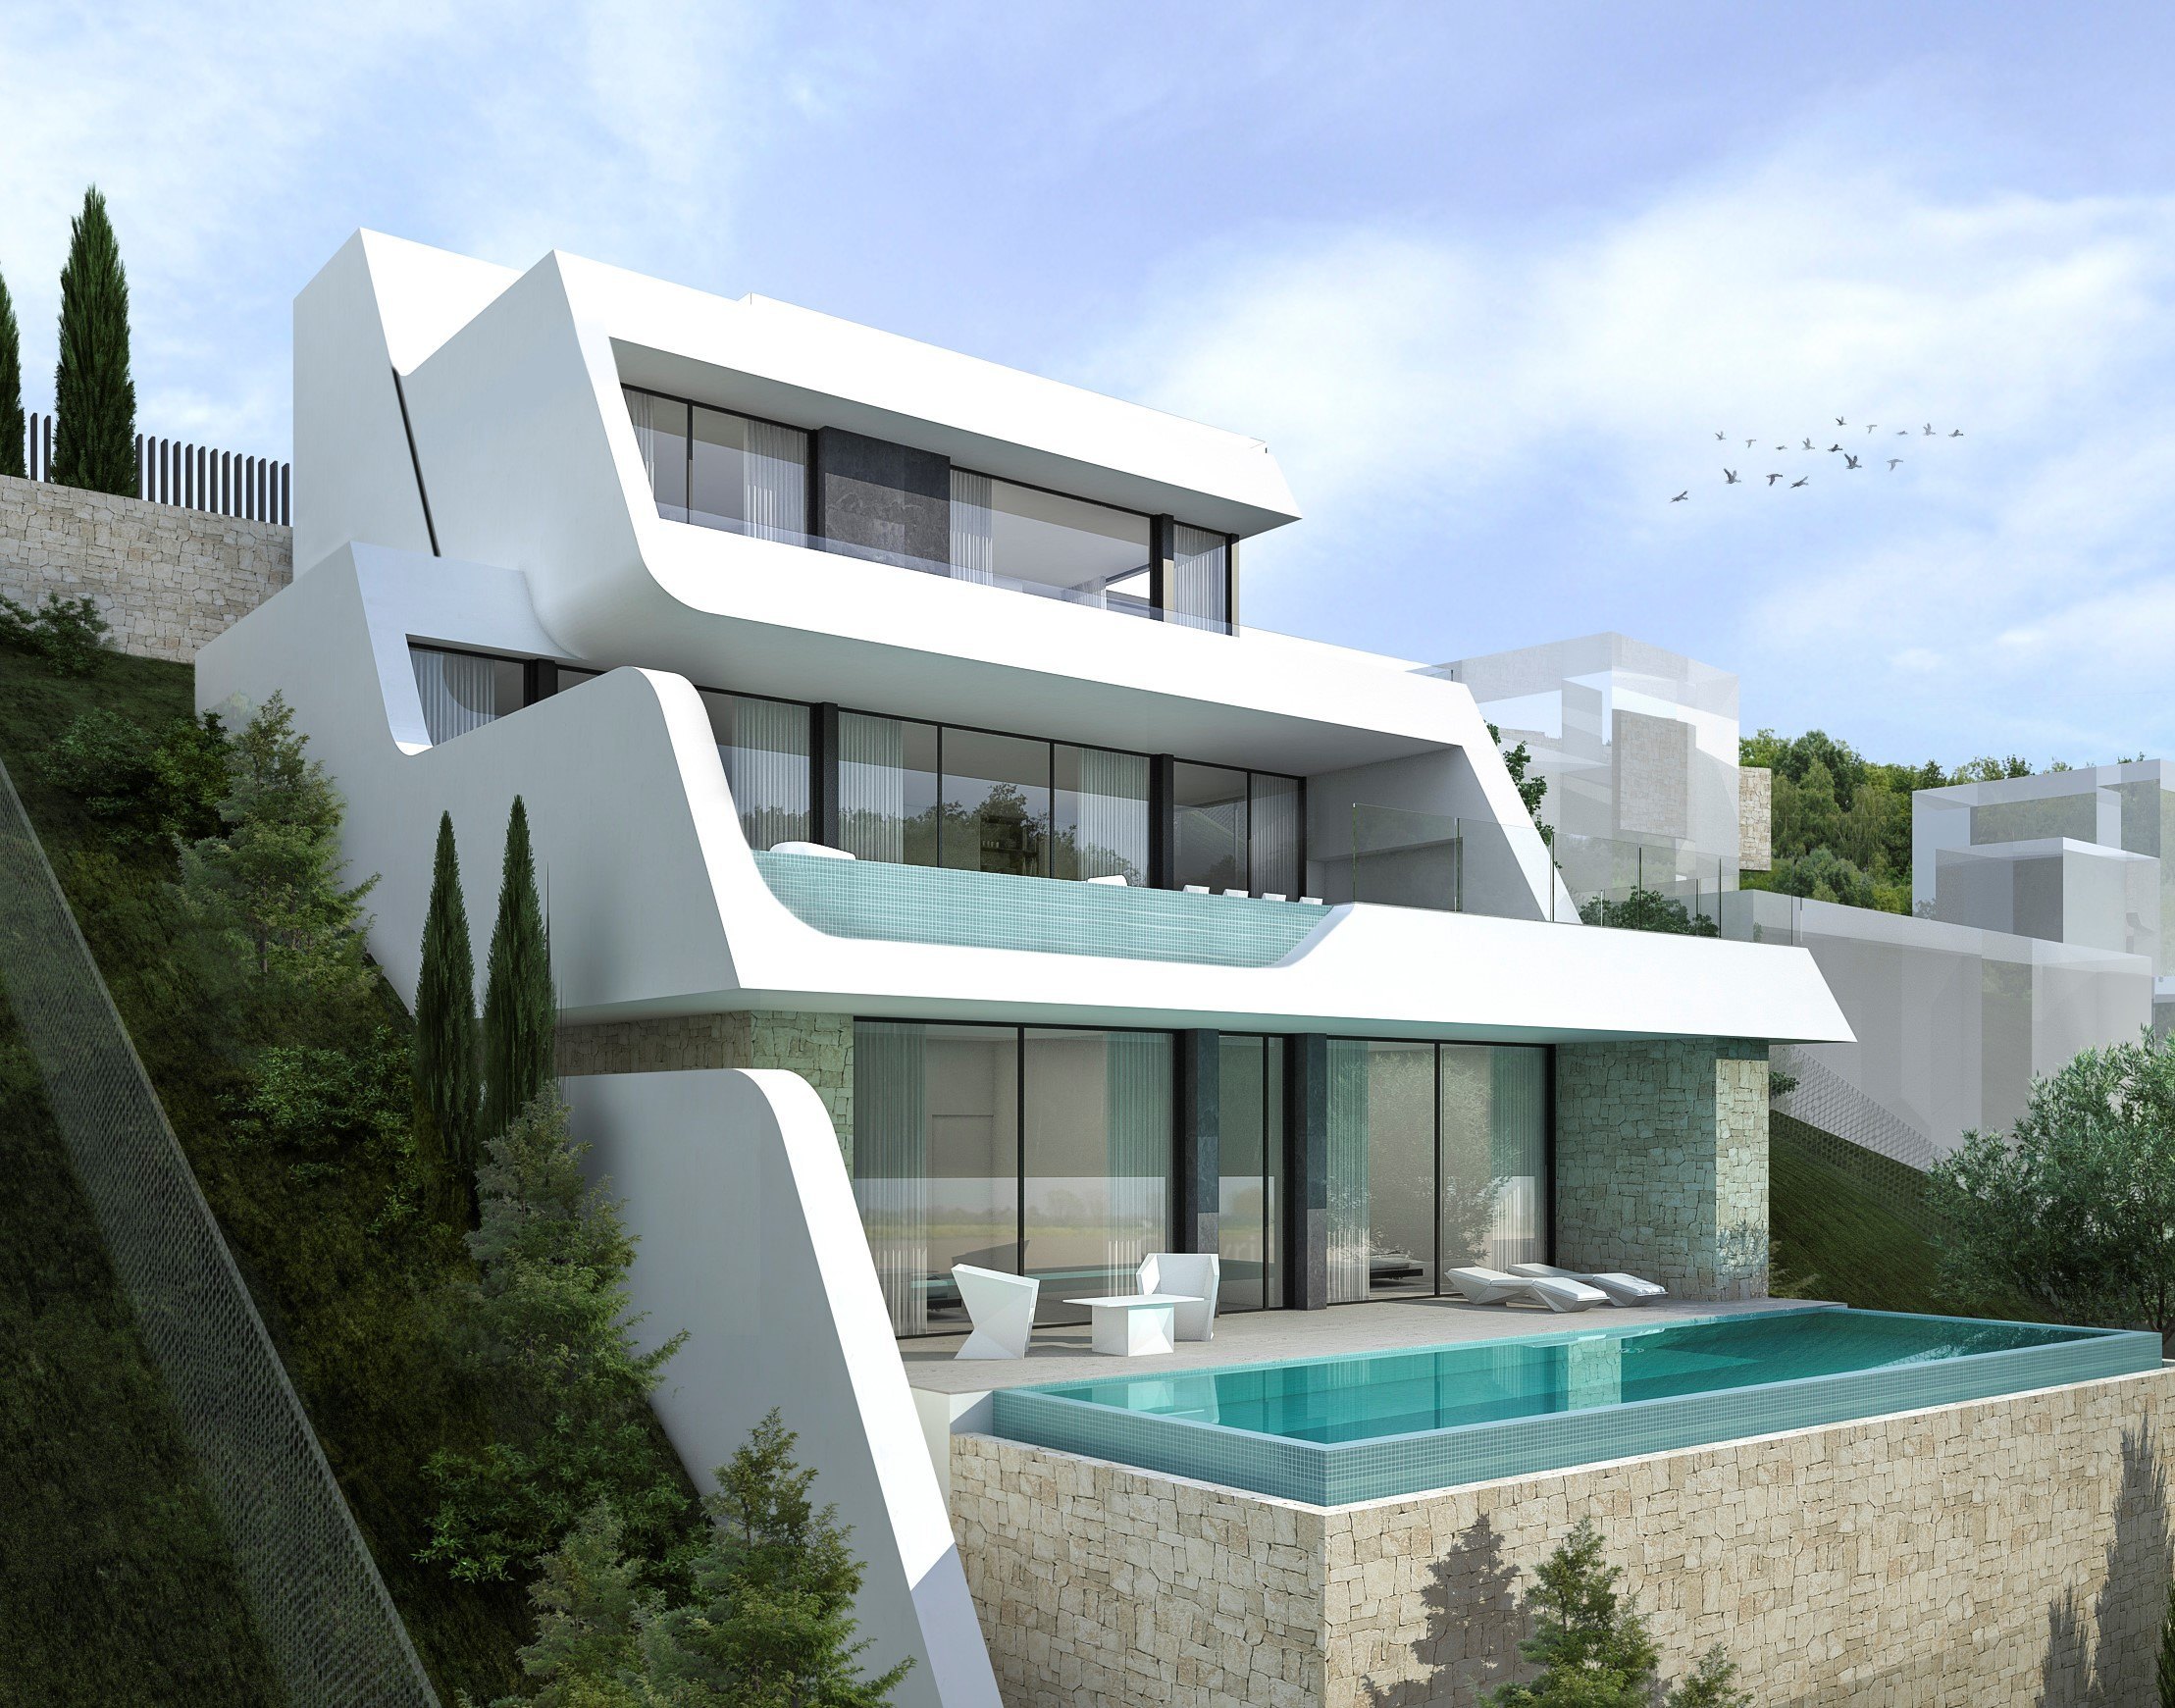 Project for a luxury villa with stunning panoramic views over the Mediterranean Sea